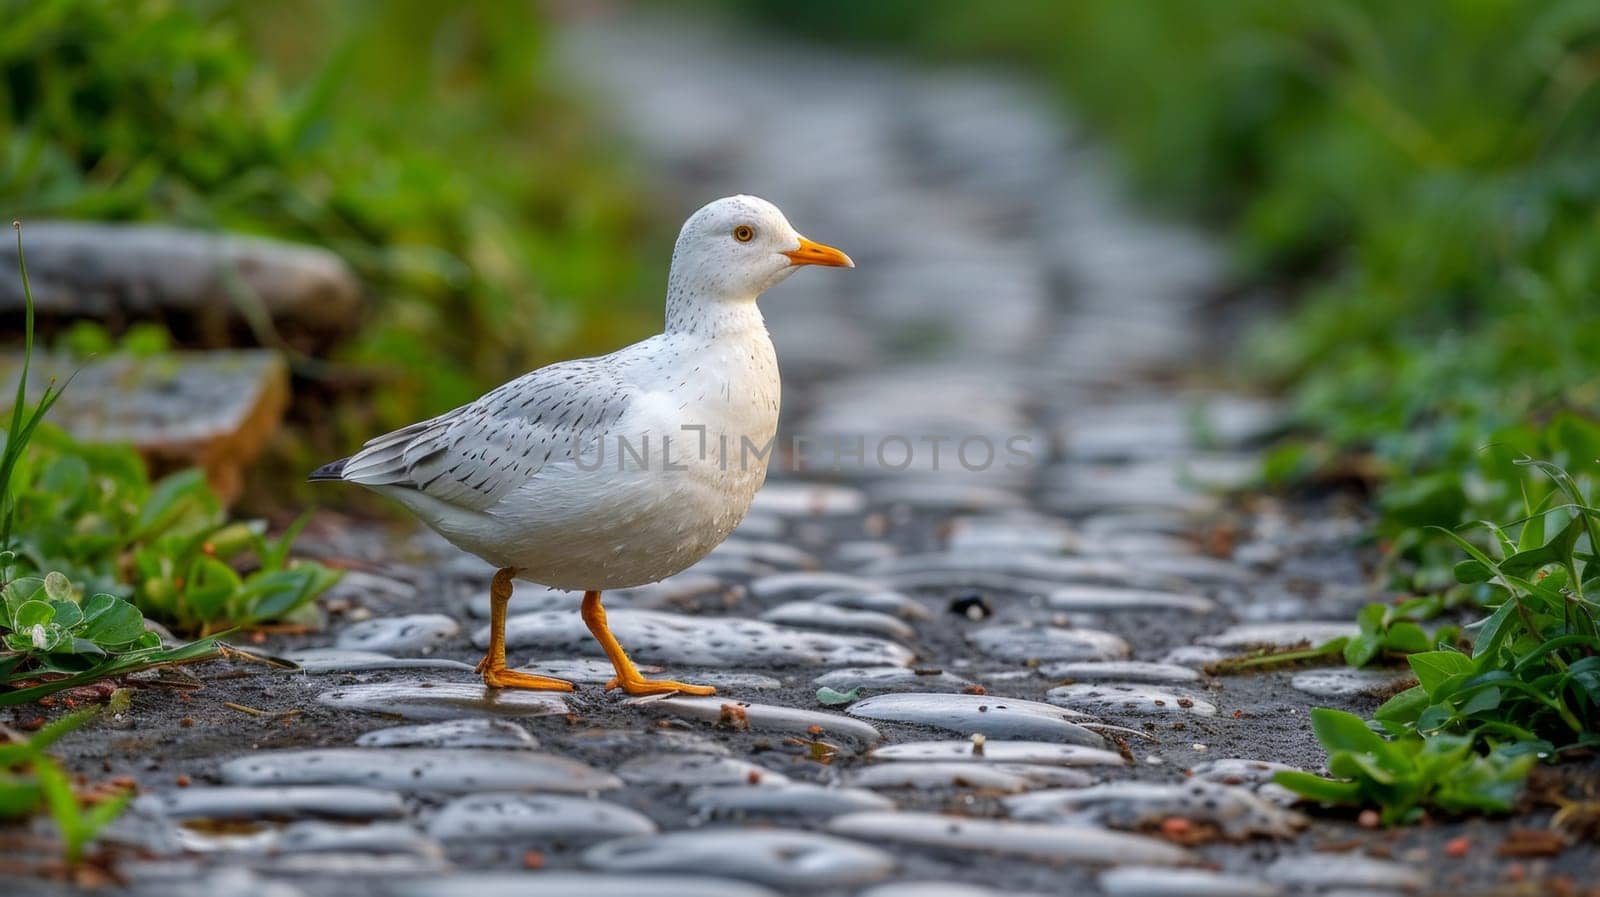 A white bird standing on a stone path with grass and rocks